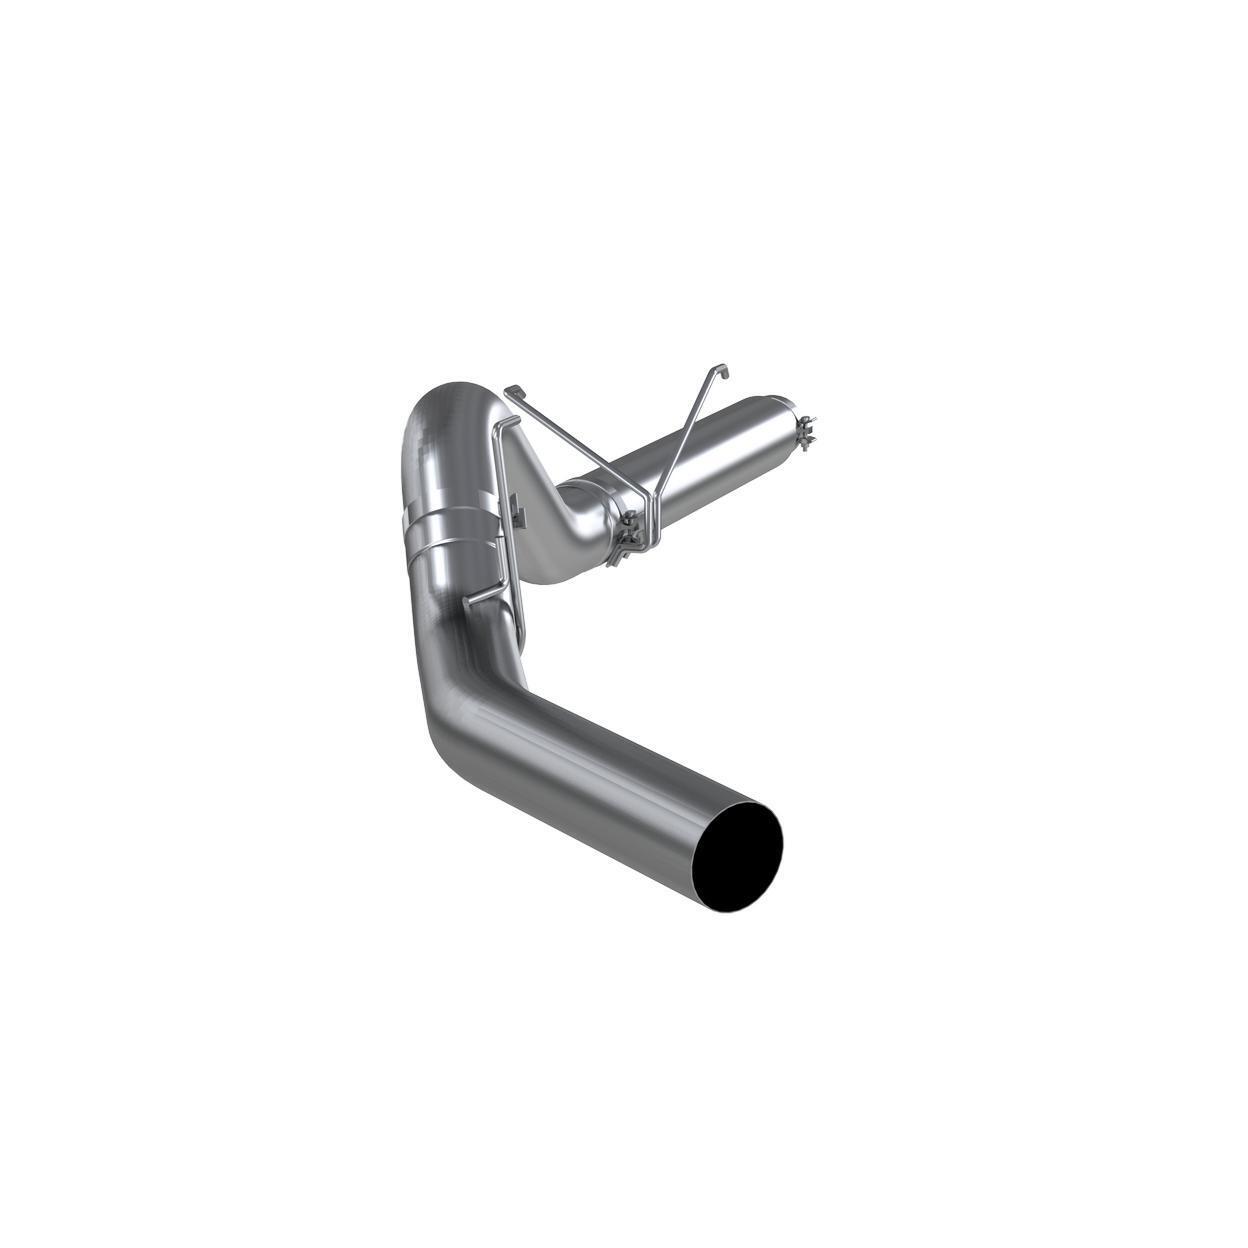 Exhaust System Kit for 2011-2012 Ram 3500